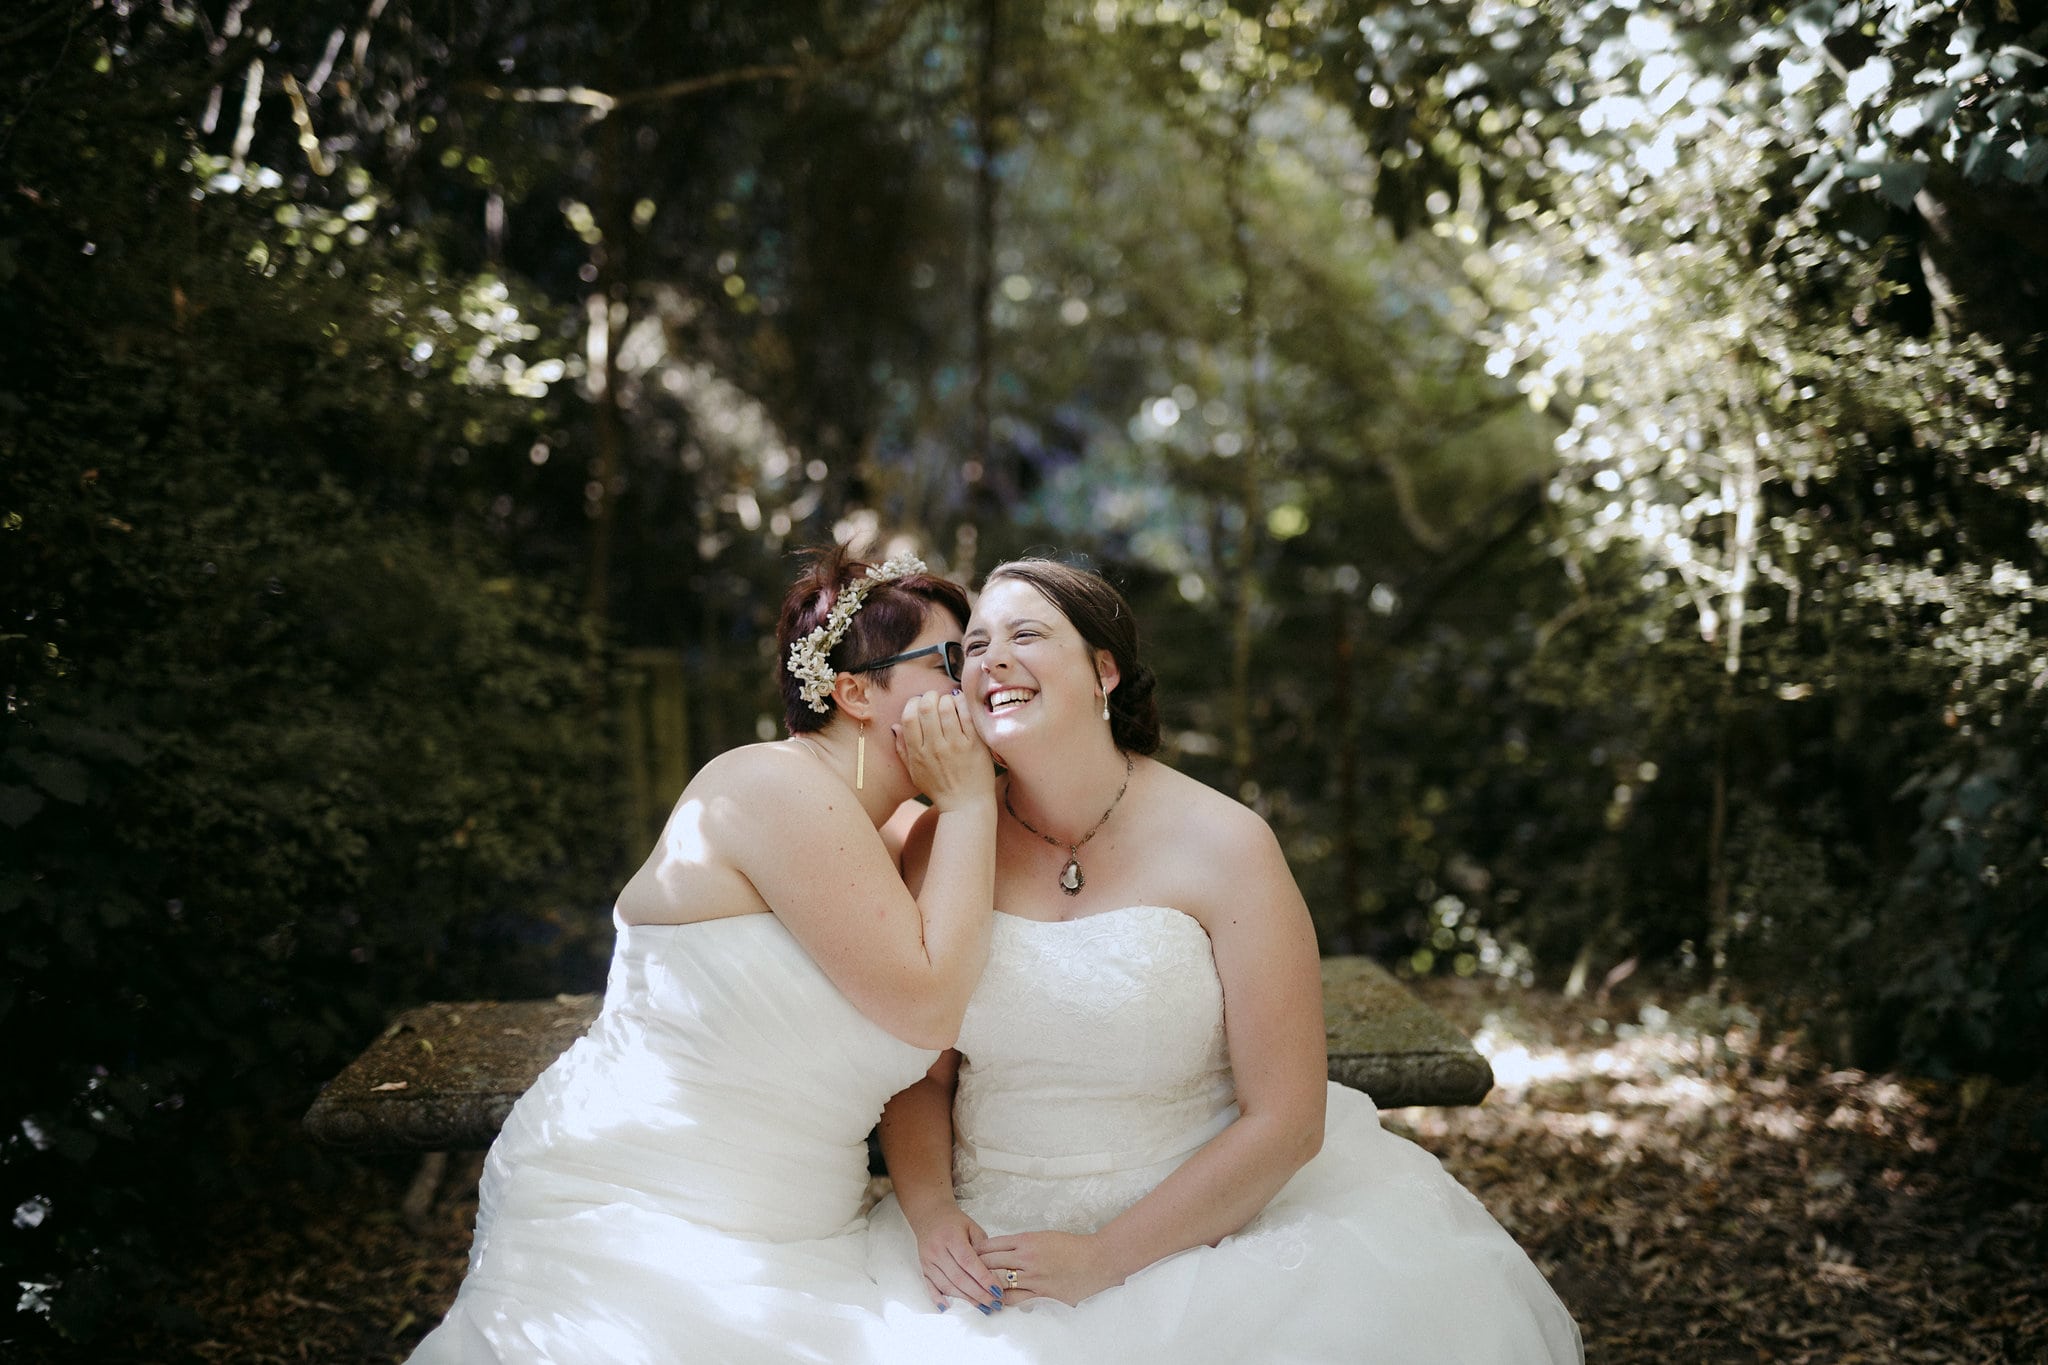 two brides sit on a stone bench among the trees whispering and laughing together